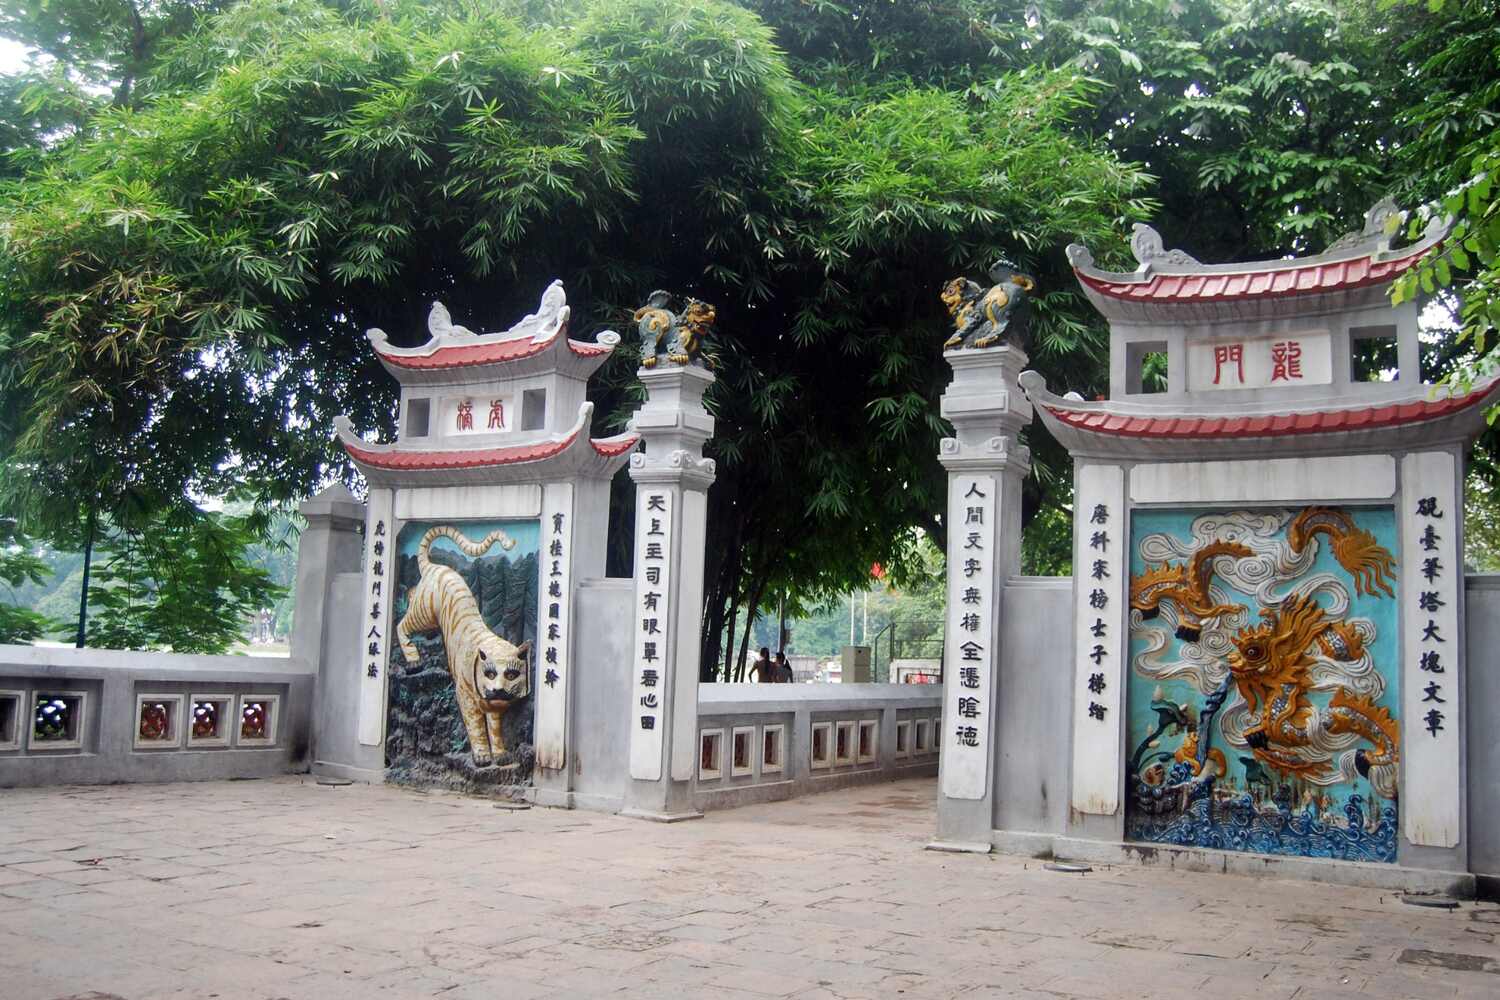 Street view of an ancient Asian temple with intricate carvings and historical architecture